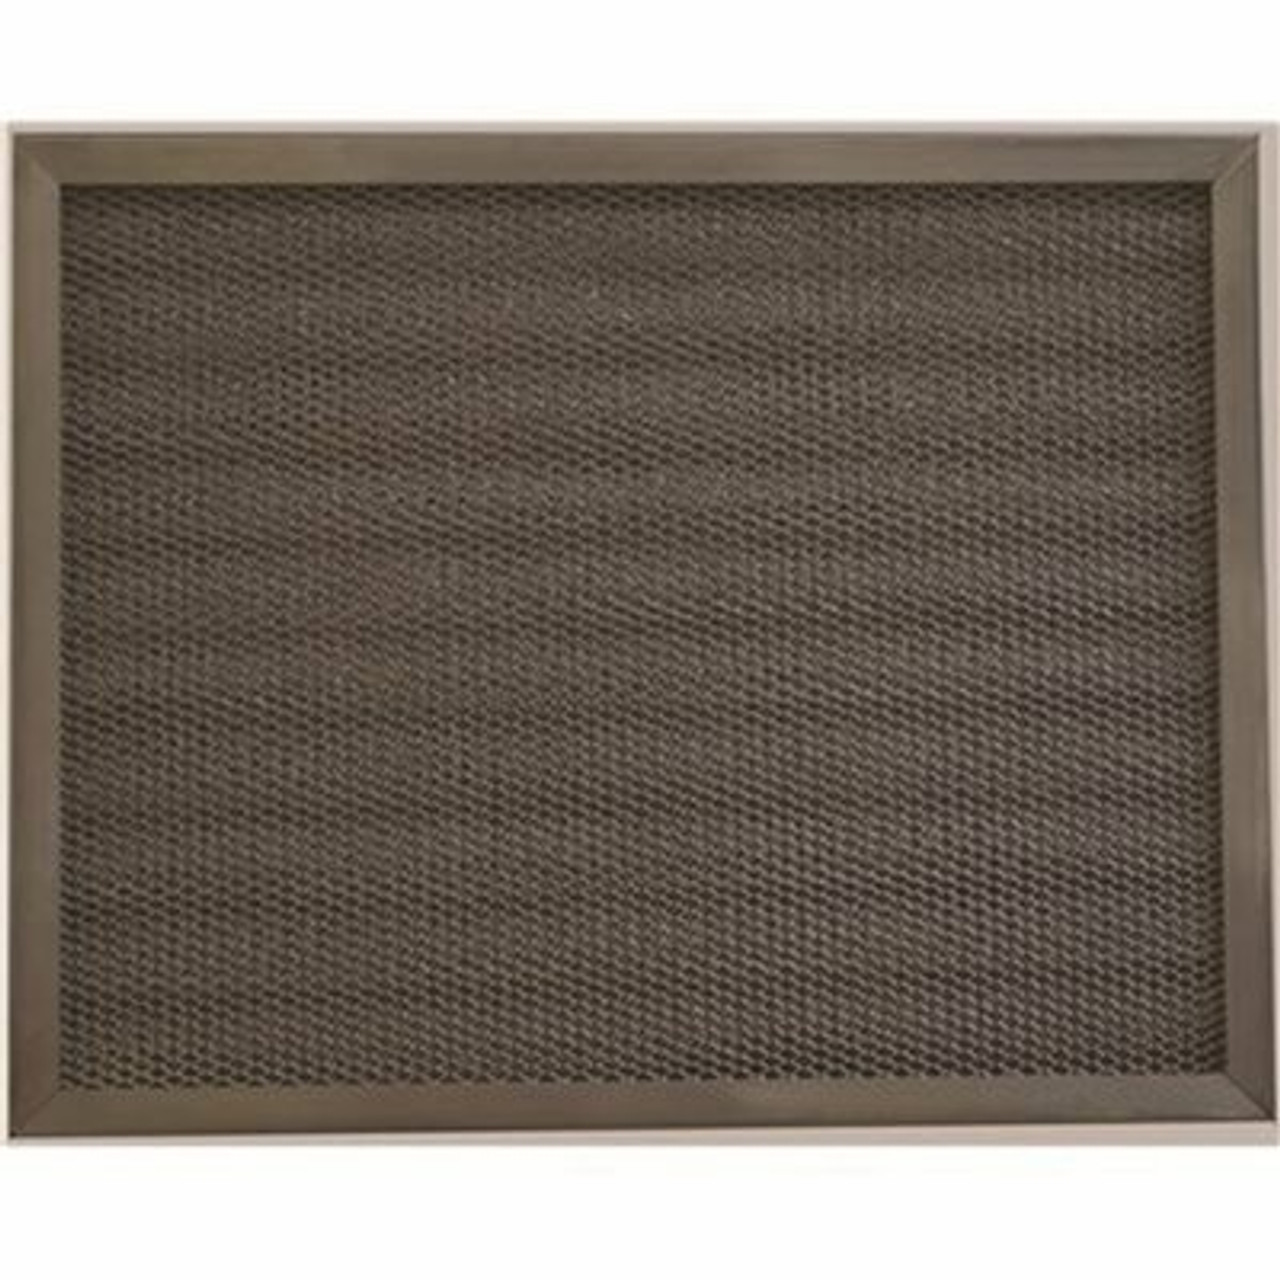 AAF Flanders 16 In. X 20 In. X 1 Washable Kkm MERV 4 Air Filter With An Aluminum Frame (Case Of 6)